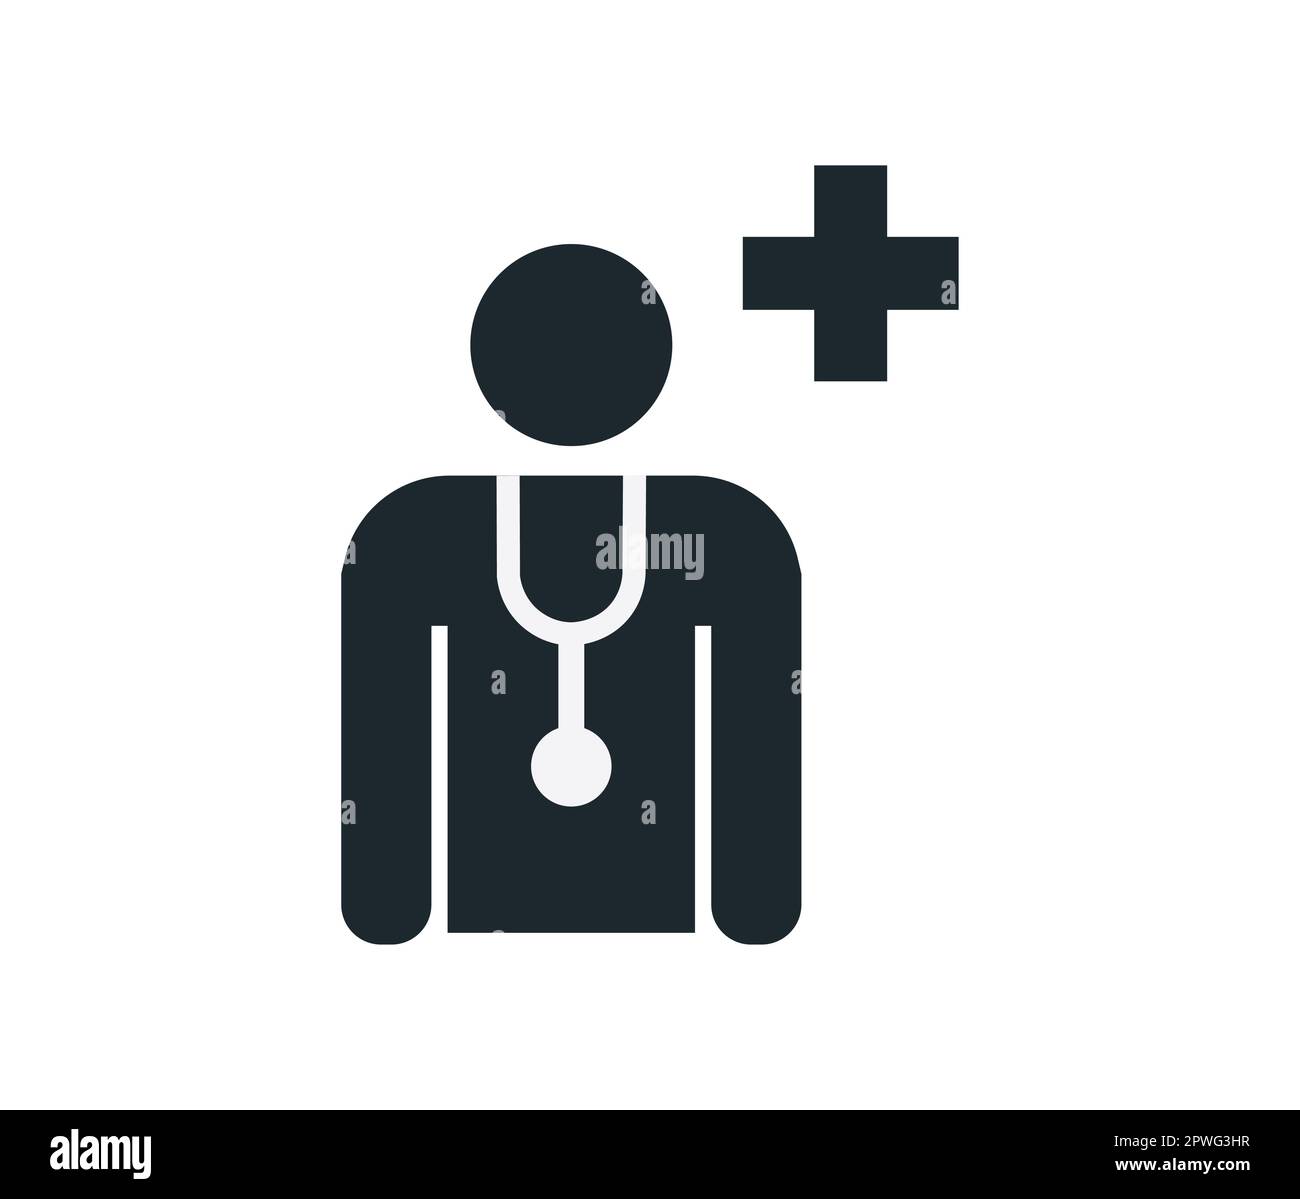 Monochromatic Health Care Centre or Doctor. Graphical Symbols for Medical devices Stock Vector